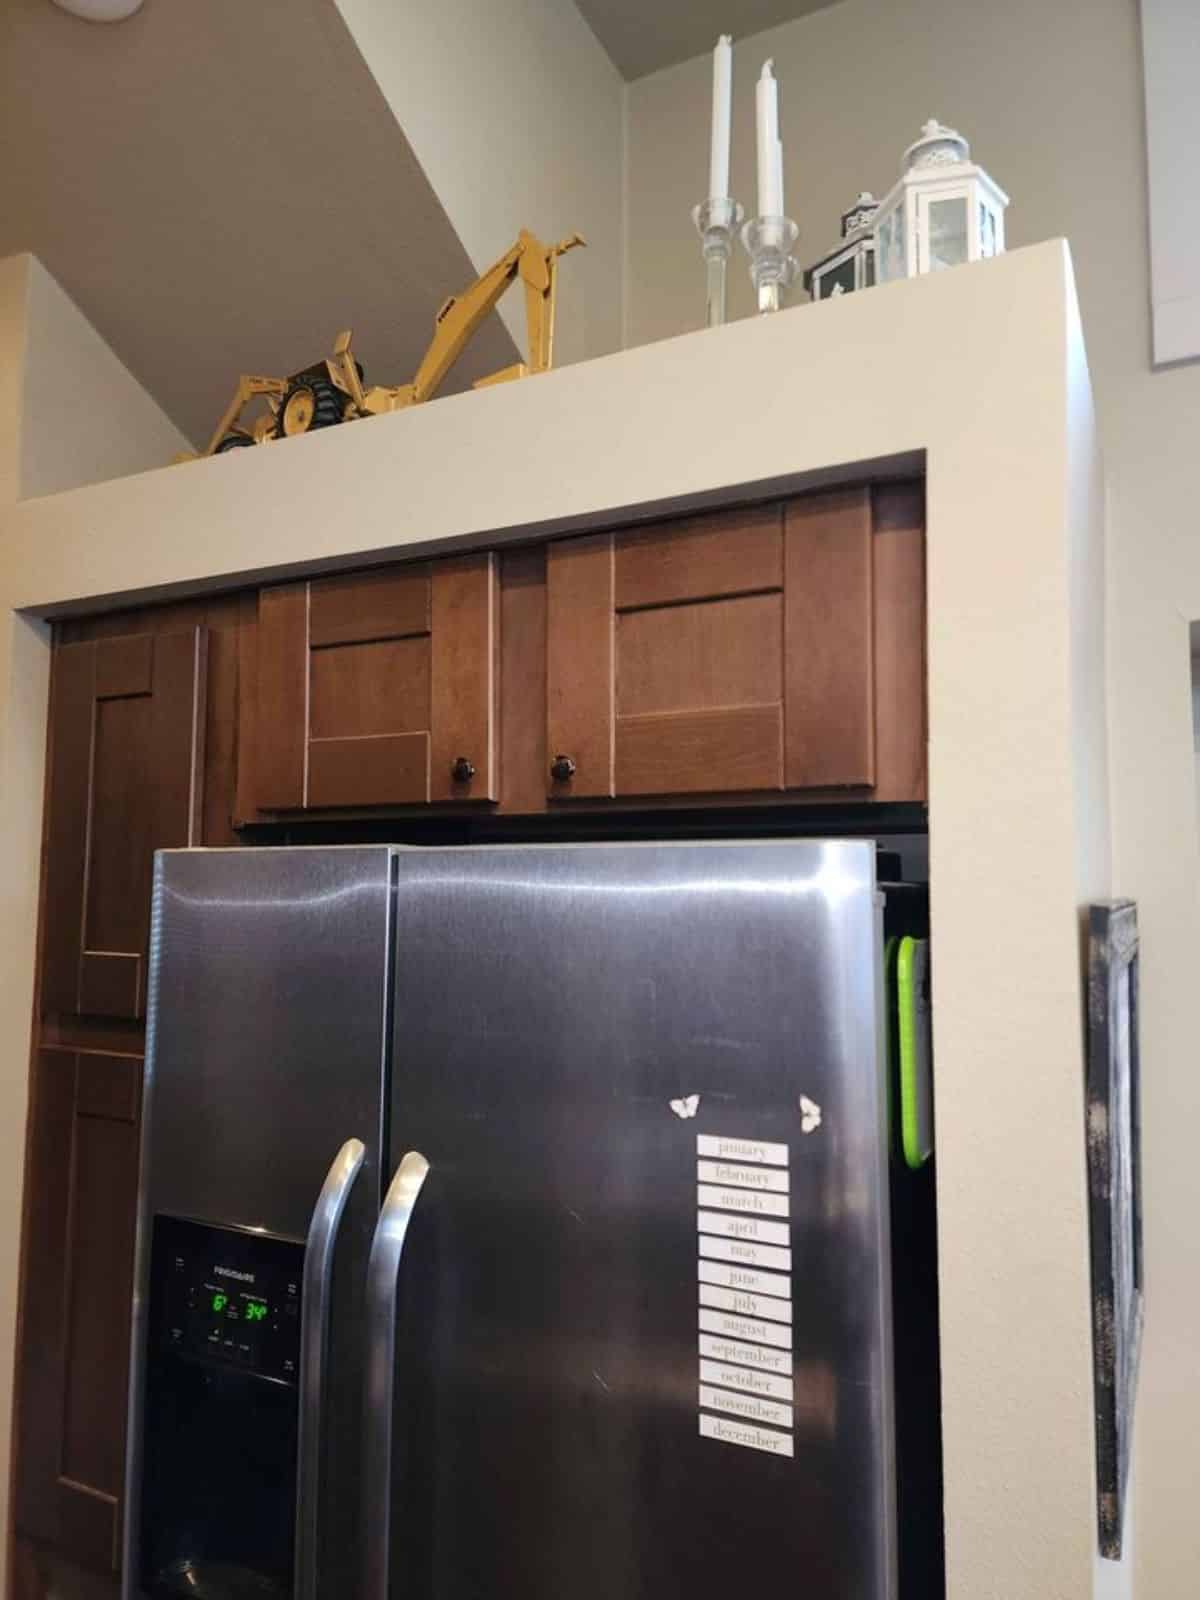 full length 2 side door refrigerator in kitchen area of spacious 1 bedroom tiny house